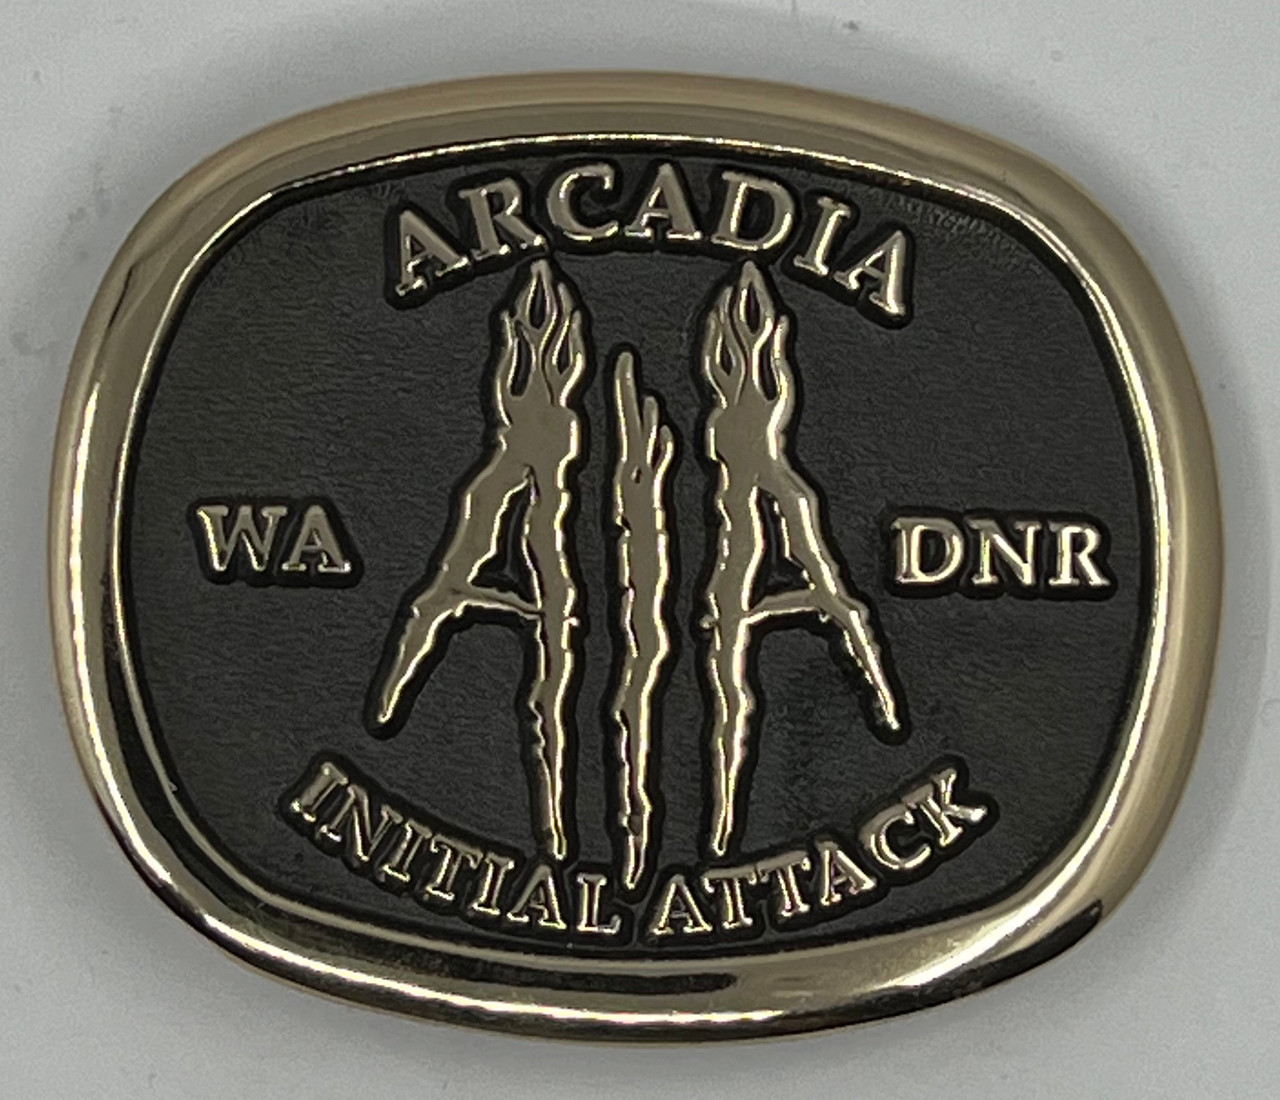 Arcadia Initial Attack Buckle (RESTRICTED)